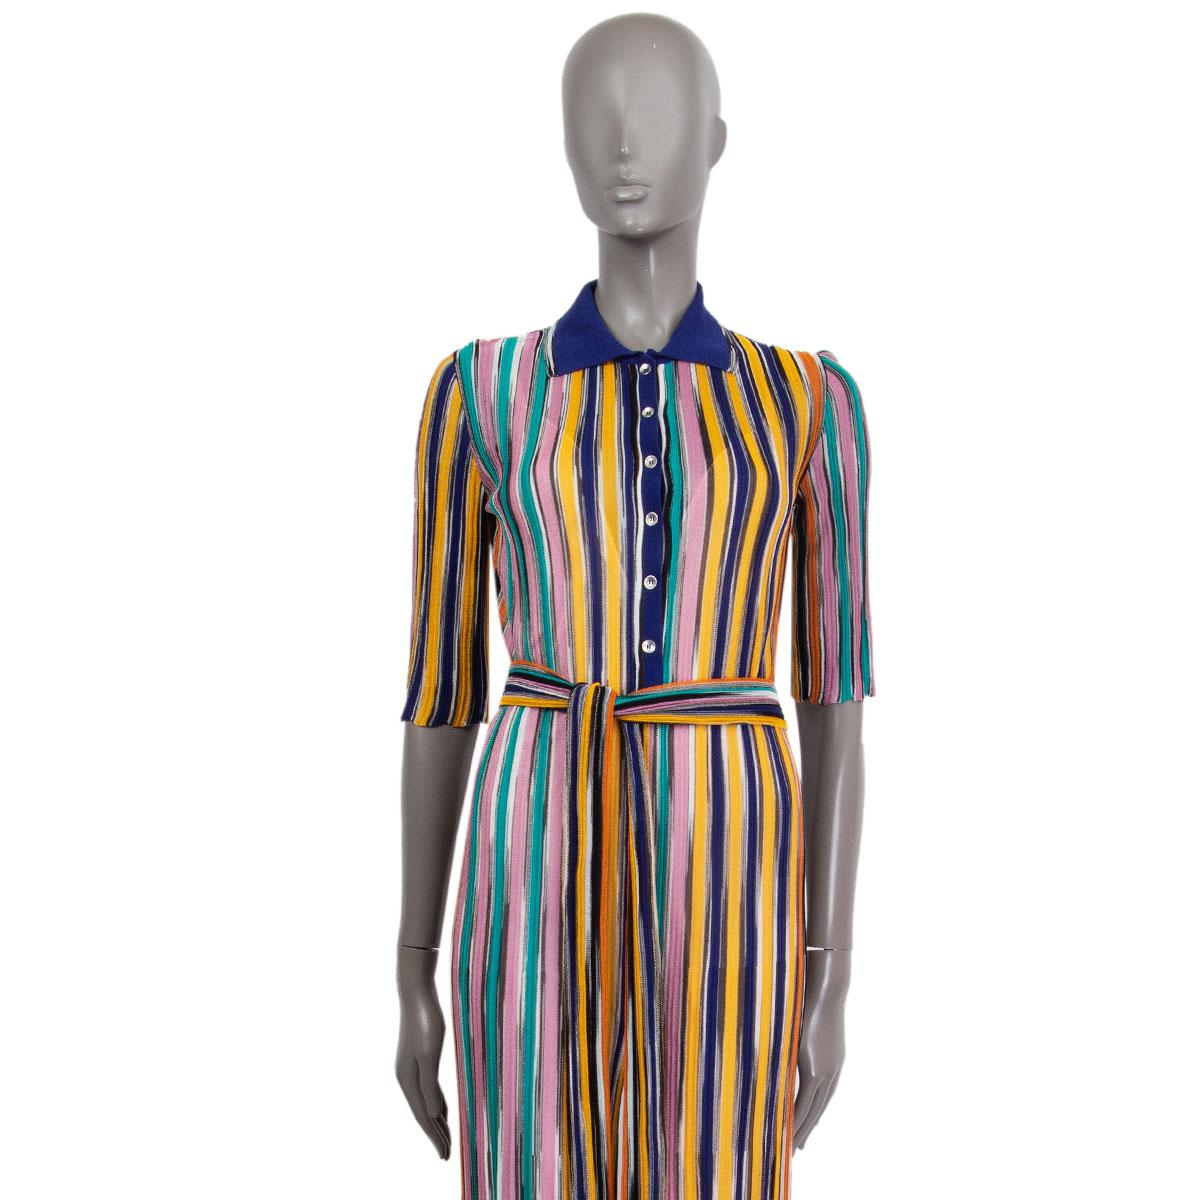 100% authentic Missoni striped belted knit jumpsuit in multi-color viscose (70%) and cotton (30%) with 3/4 sleeves. Closes with six buttons on the front and with a belt at the waistline. Lined in rosa silk (100%). Has been worn and is in excellent